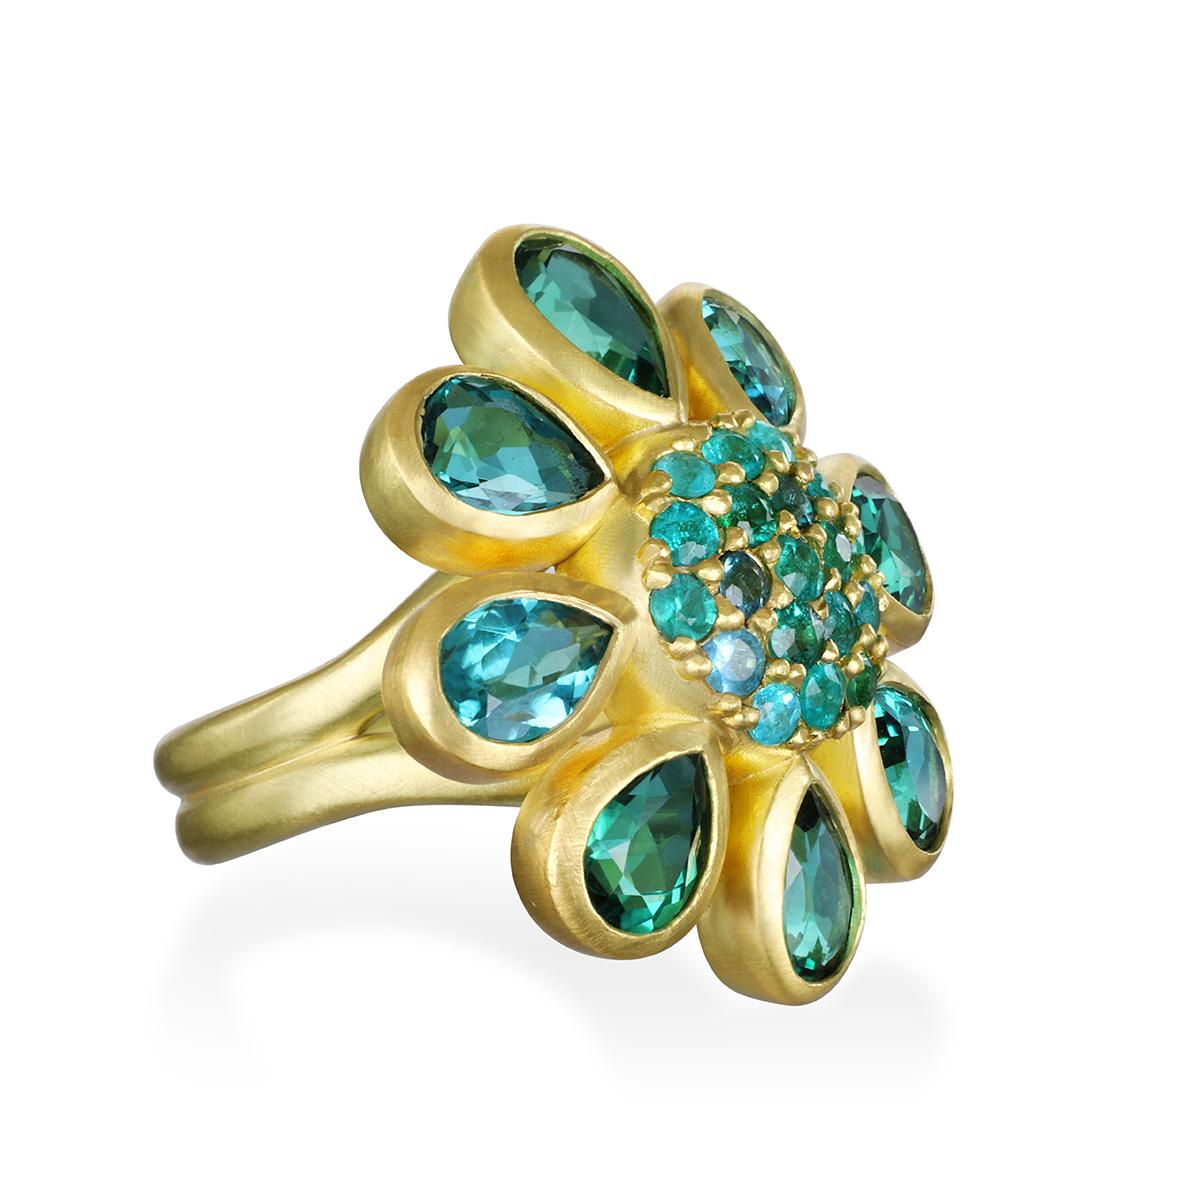 Faye Kim's 18k gold flower ring with its spectacular petals of blue-green tourmaline and Paraiba tourmaline 